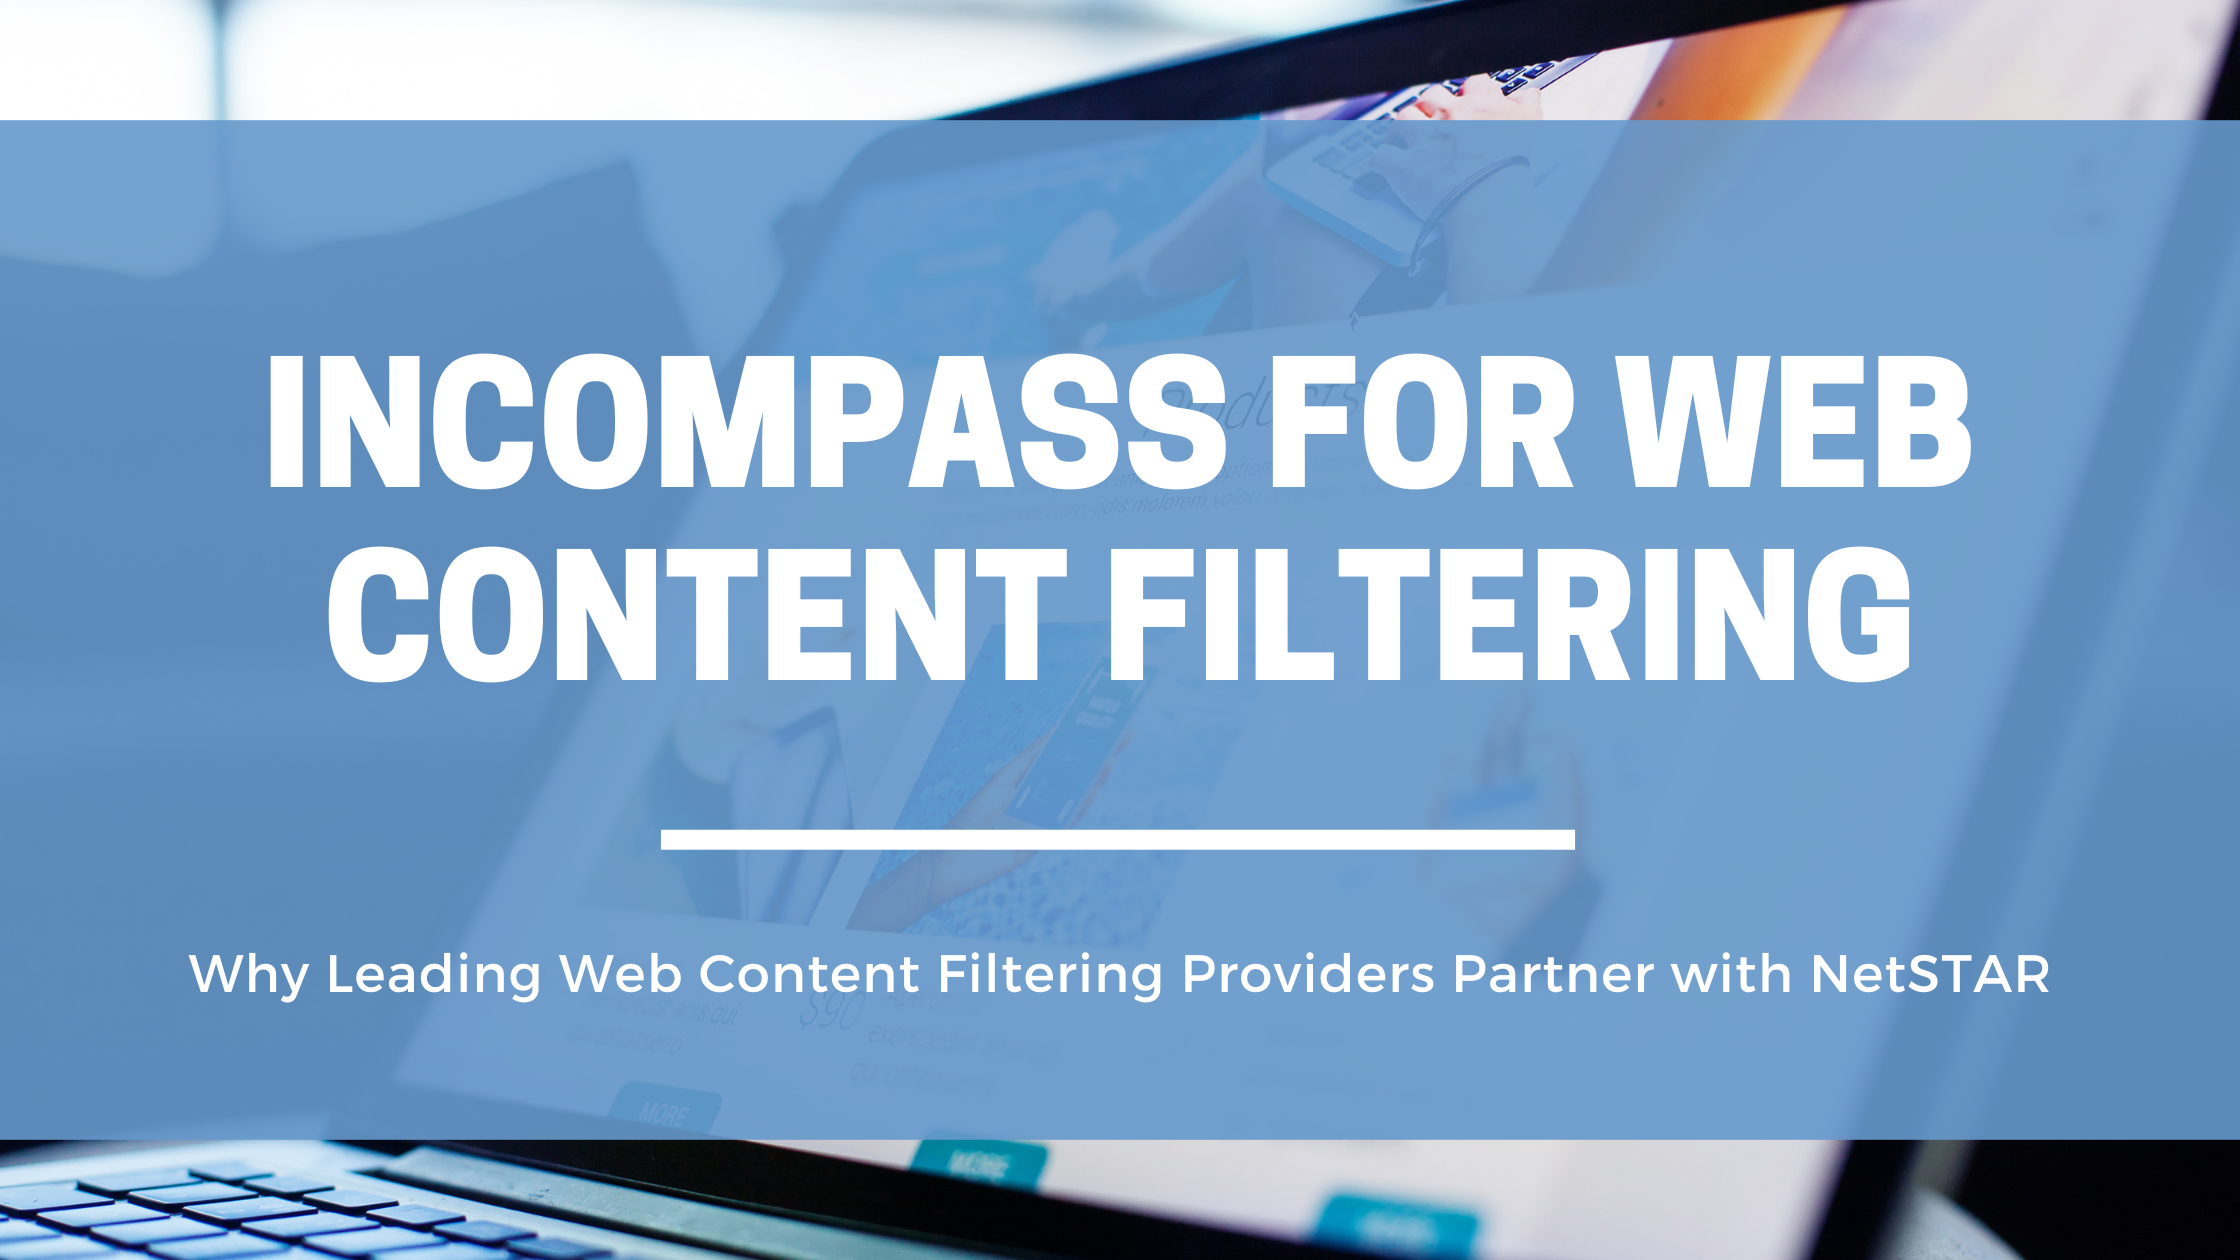 Web Content Filtering